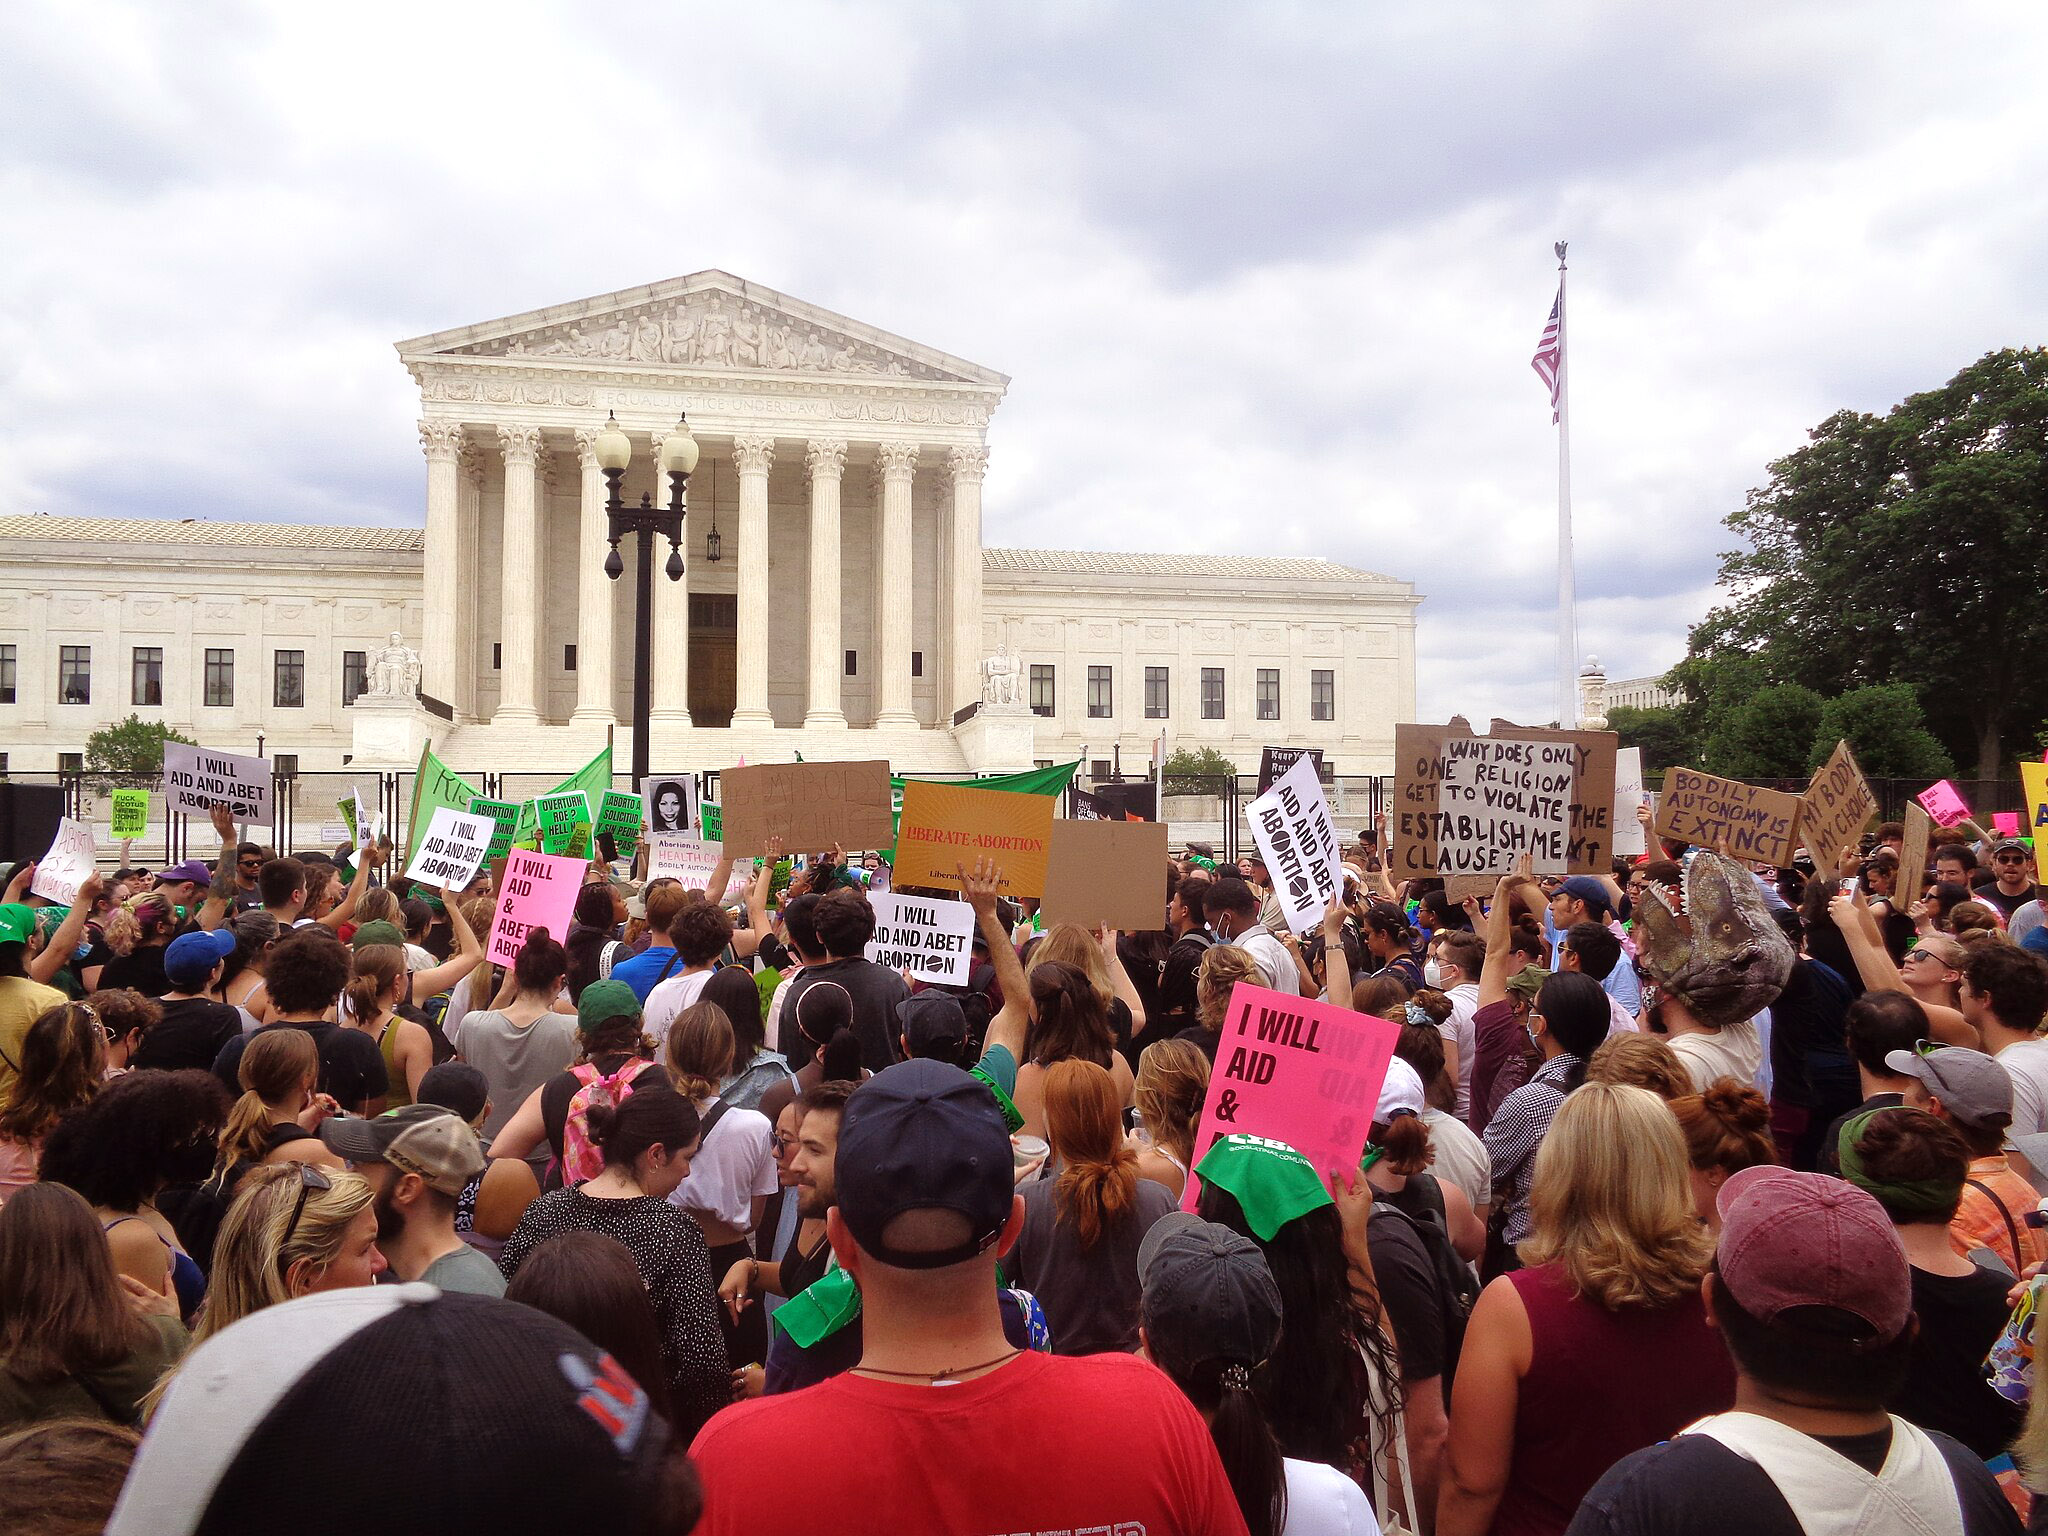 Photo shows large crowd holding signs in favor of abortion facing the Supreme Court building, June 24, 2022. Photo by Fypie/Wikimedia Commons